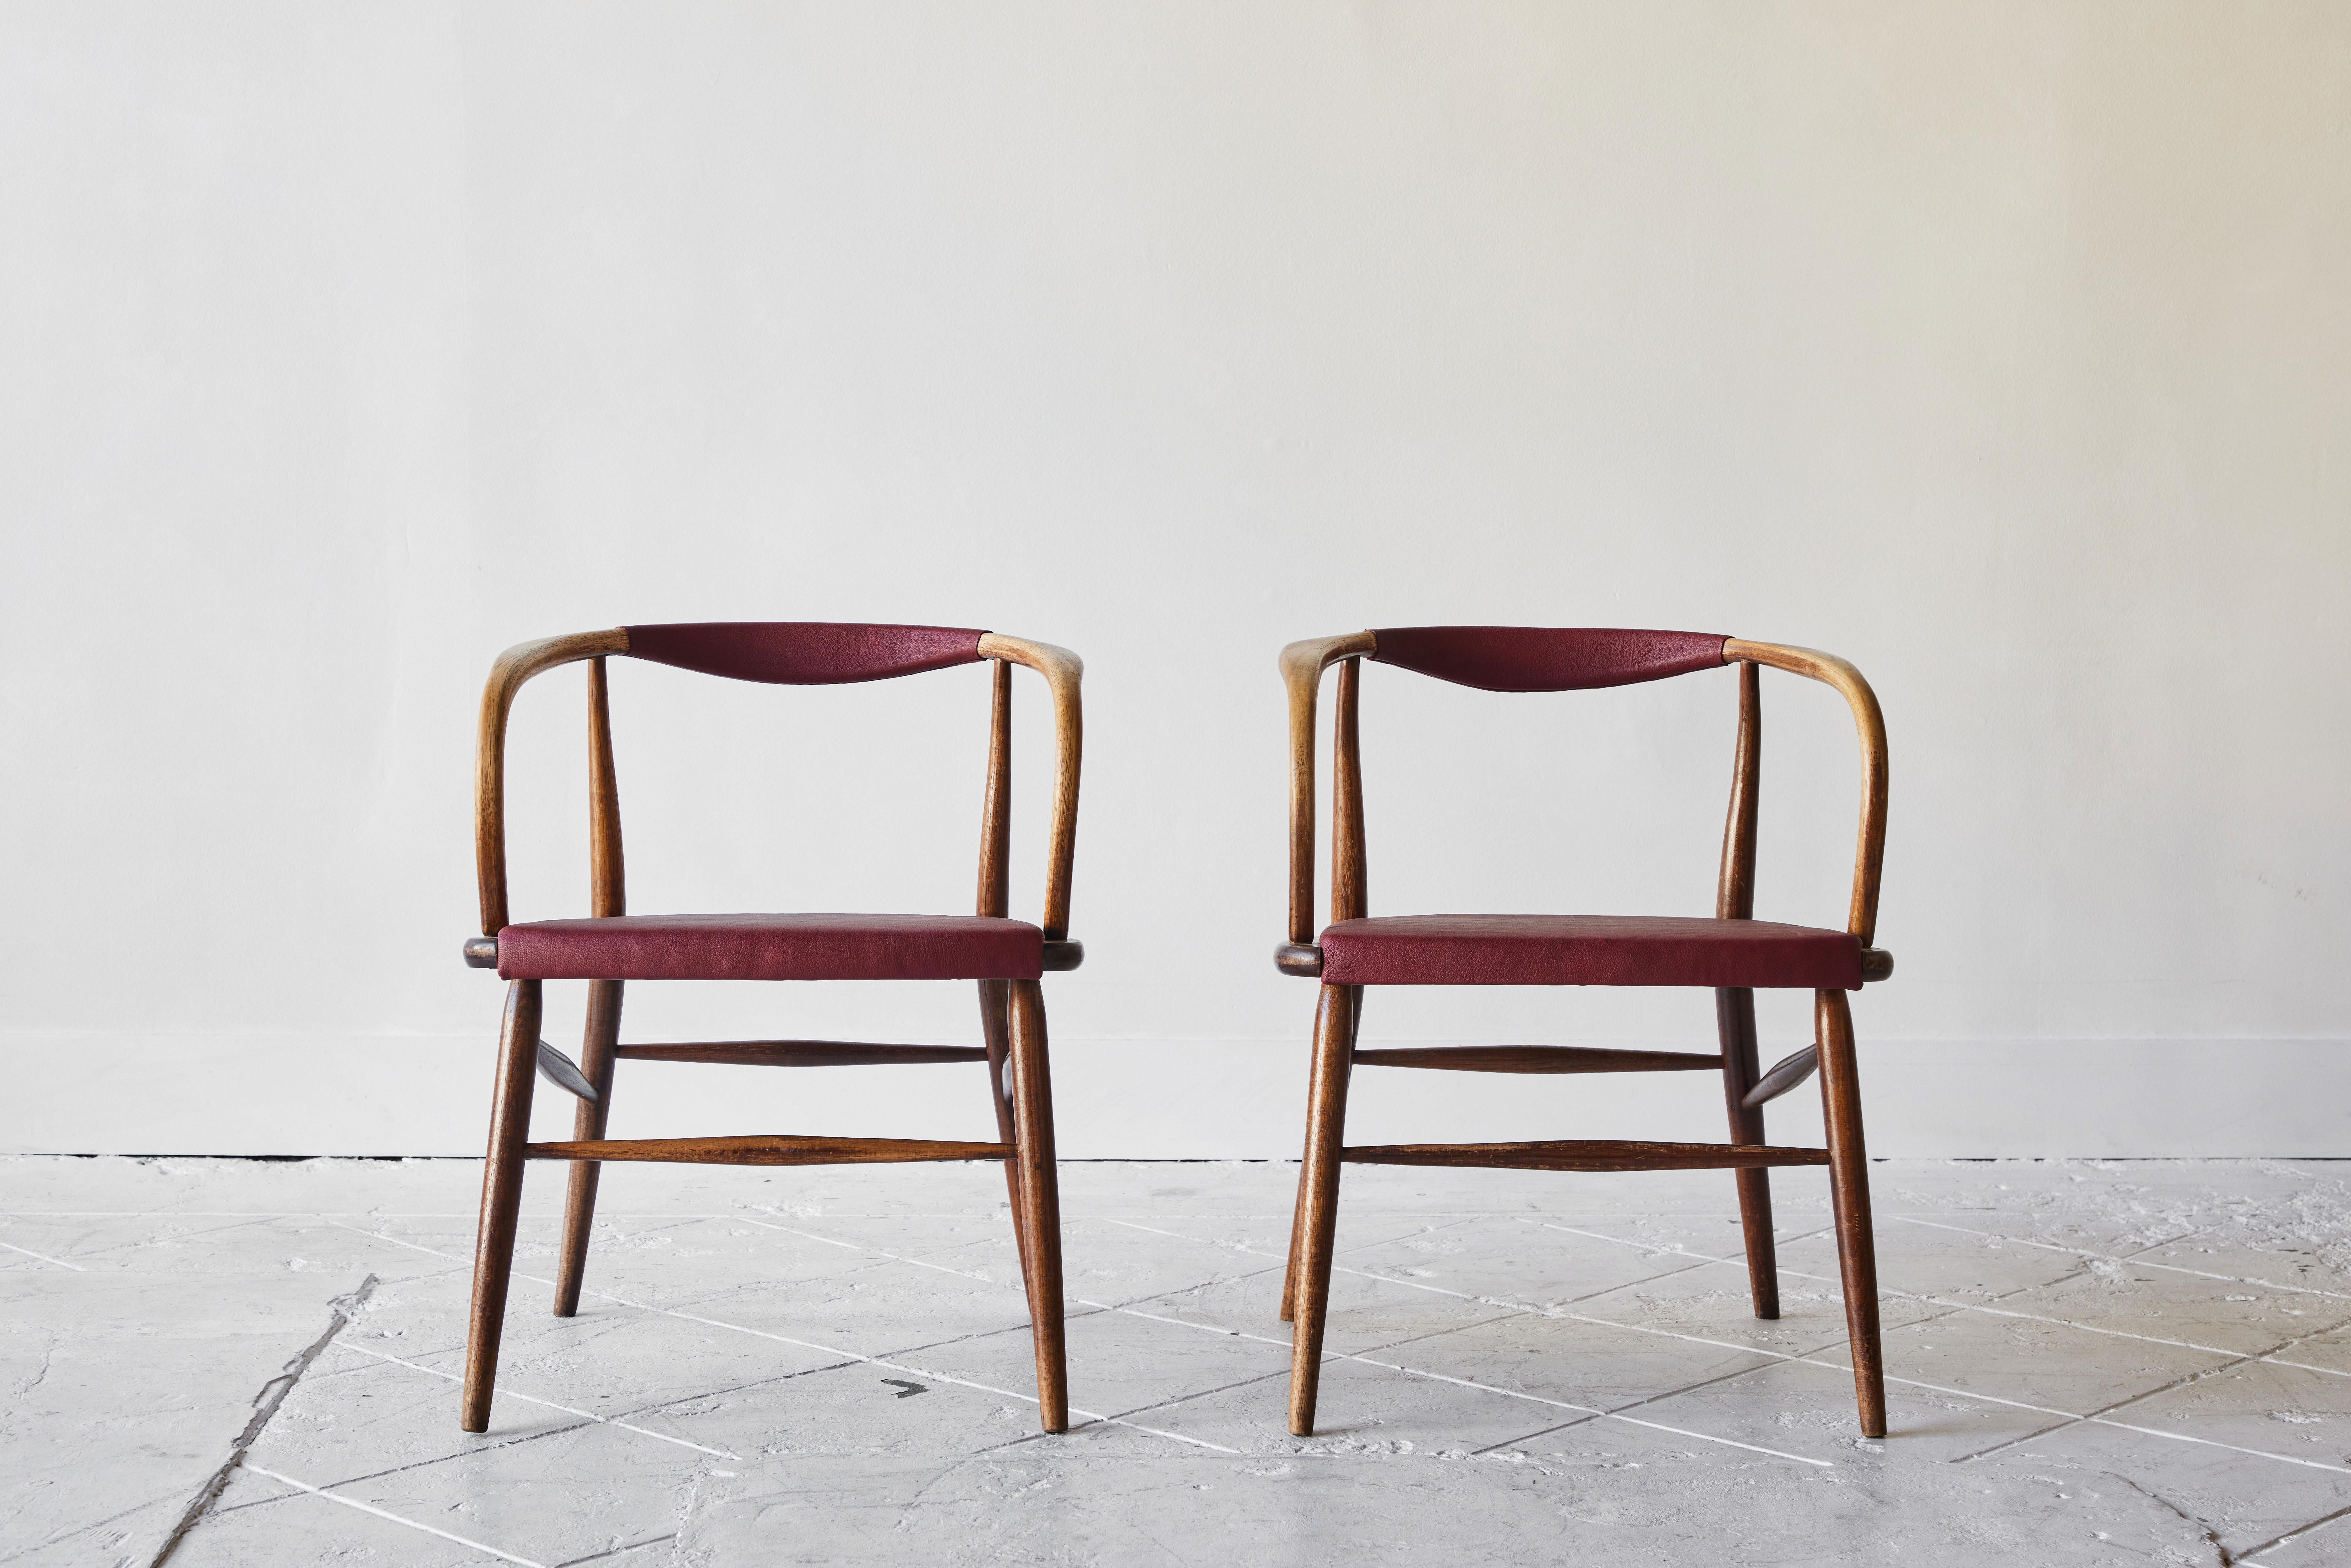 This elegant bentwood Classic is a masterpiece in its construction and features a beautifully upholstered oxblood leather seat cushion and back rest. The design is attributed to Michael Thonet, an Austrian cabinet maker known for his invention of